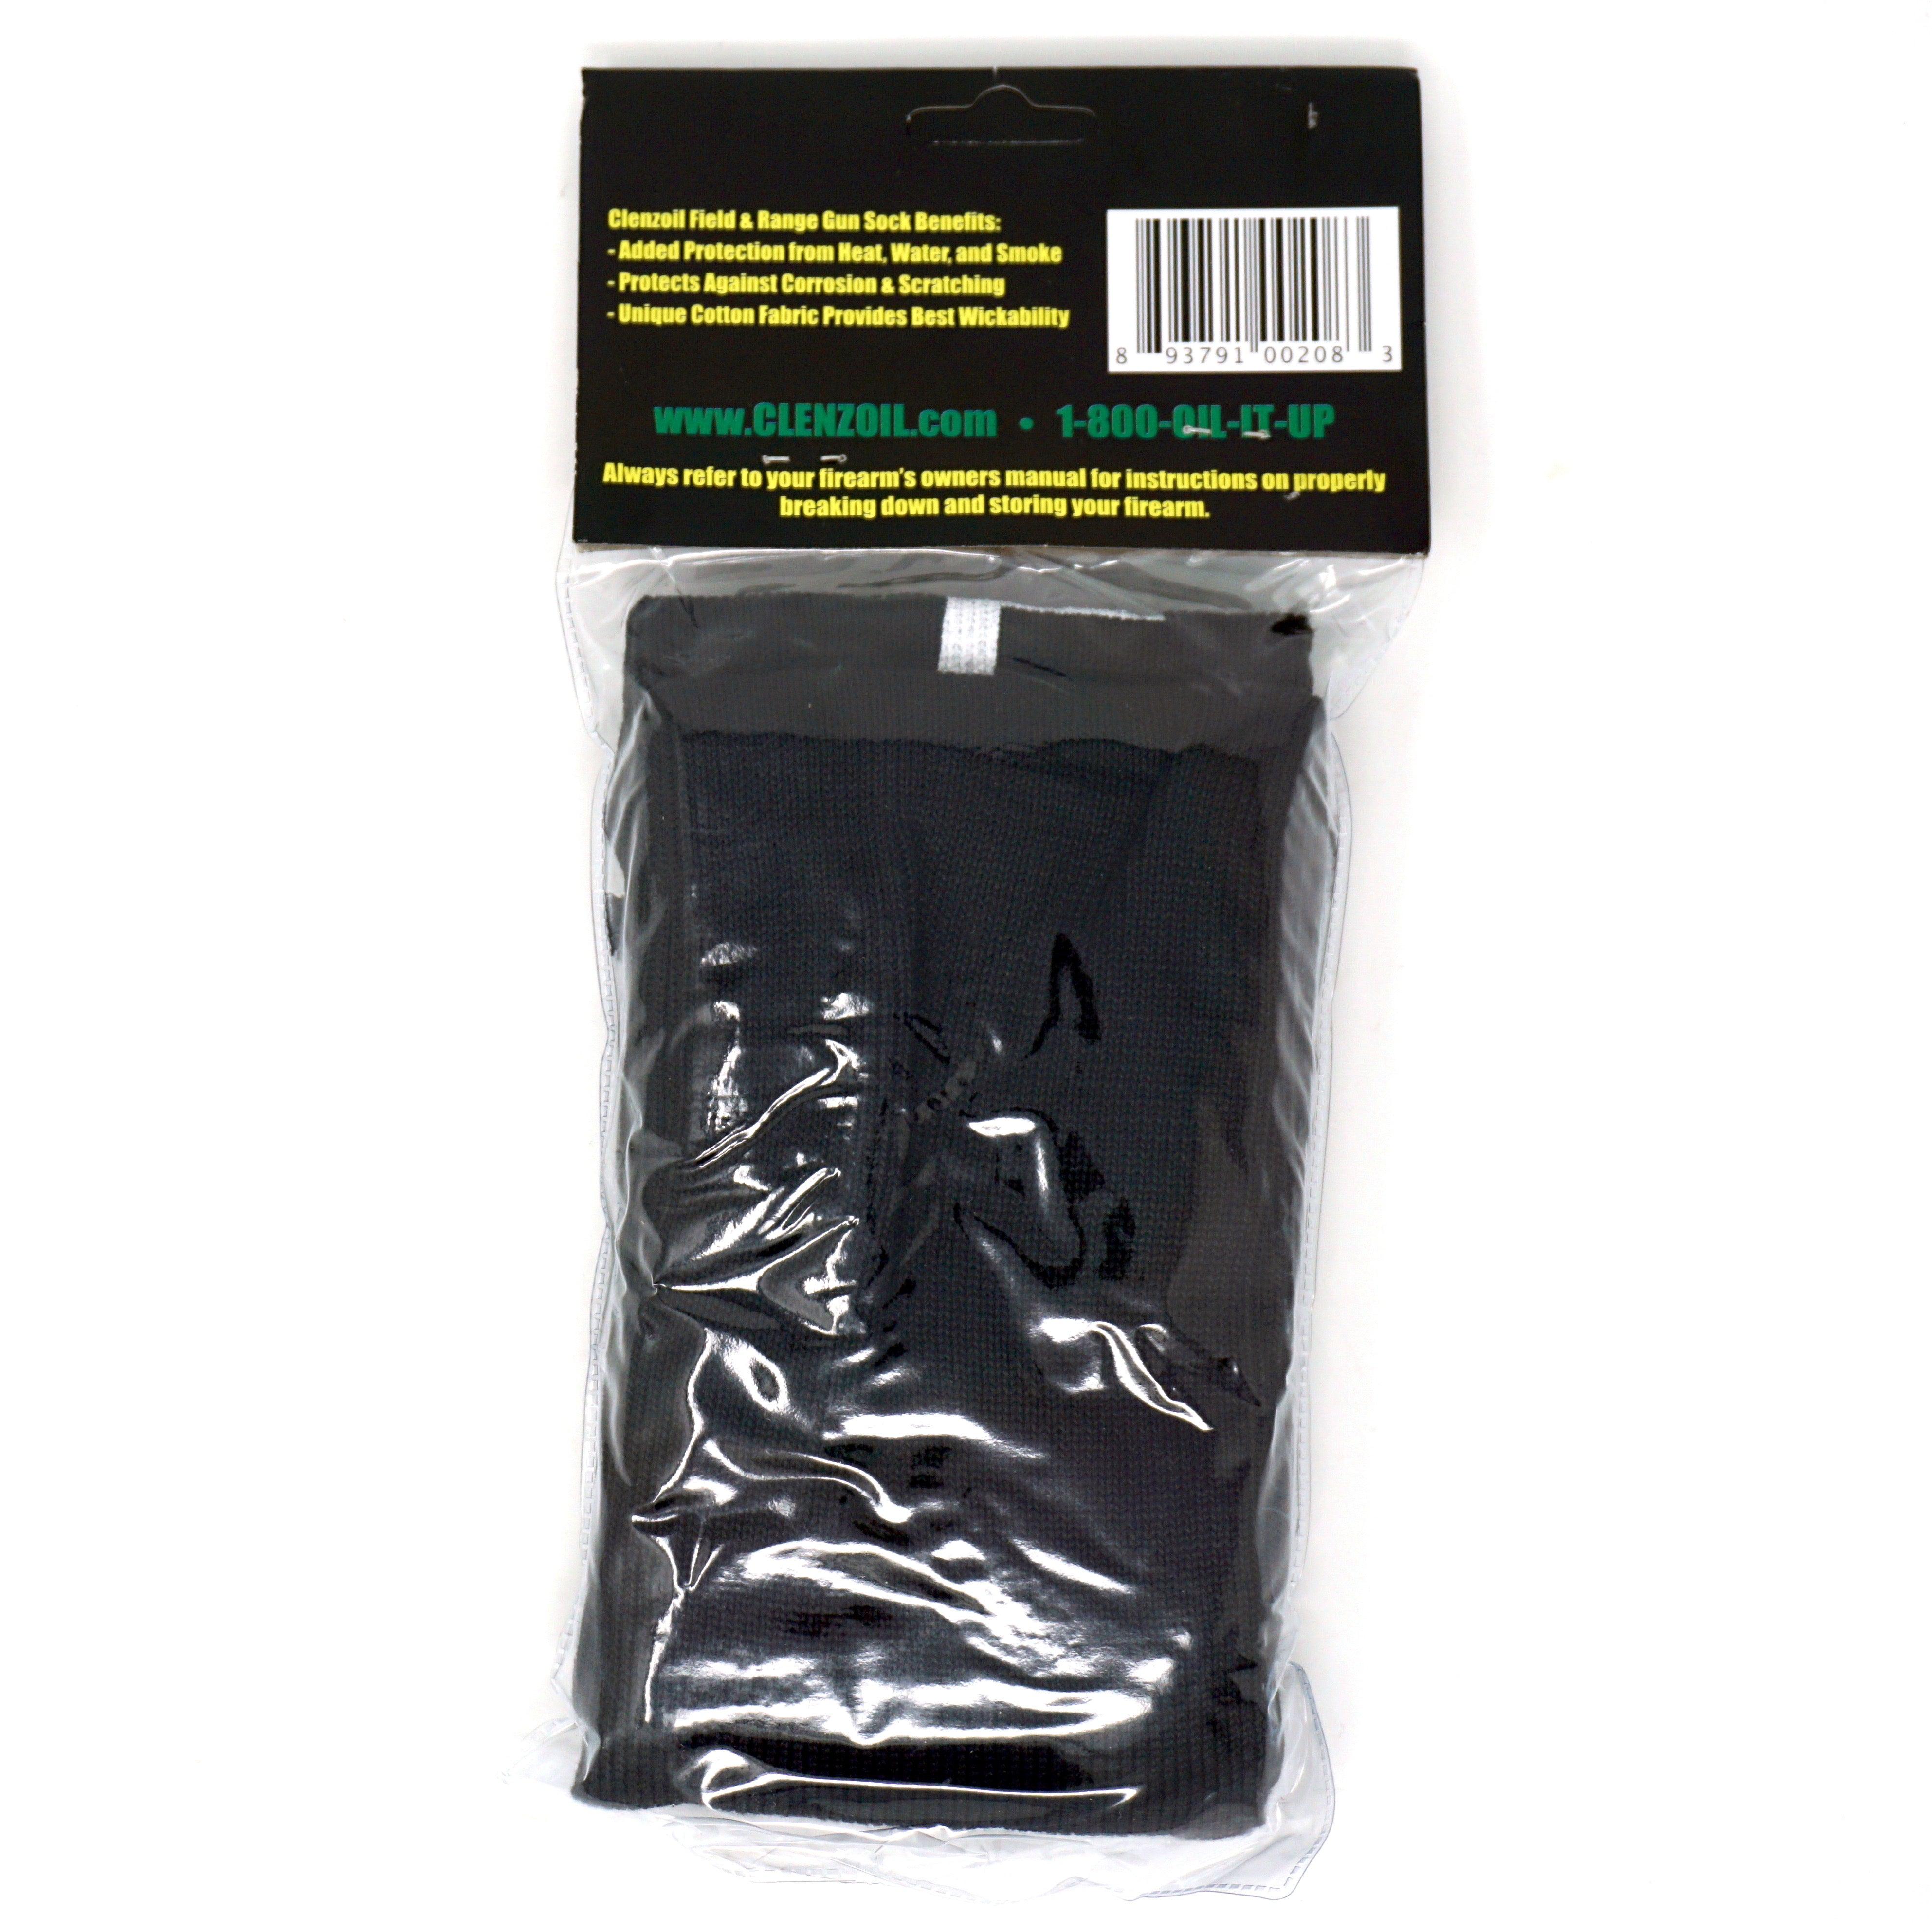 Firearm Protective Sleeve - Clenzoil Unlimited